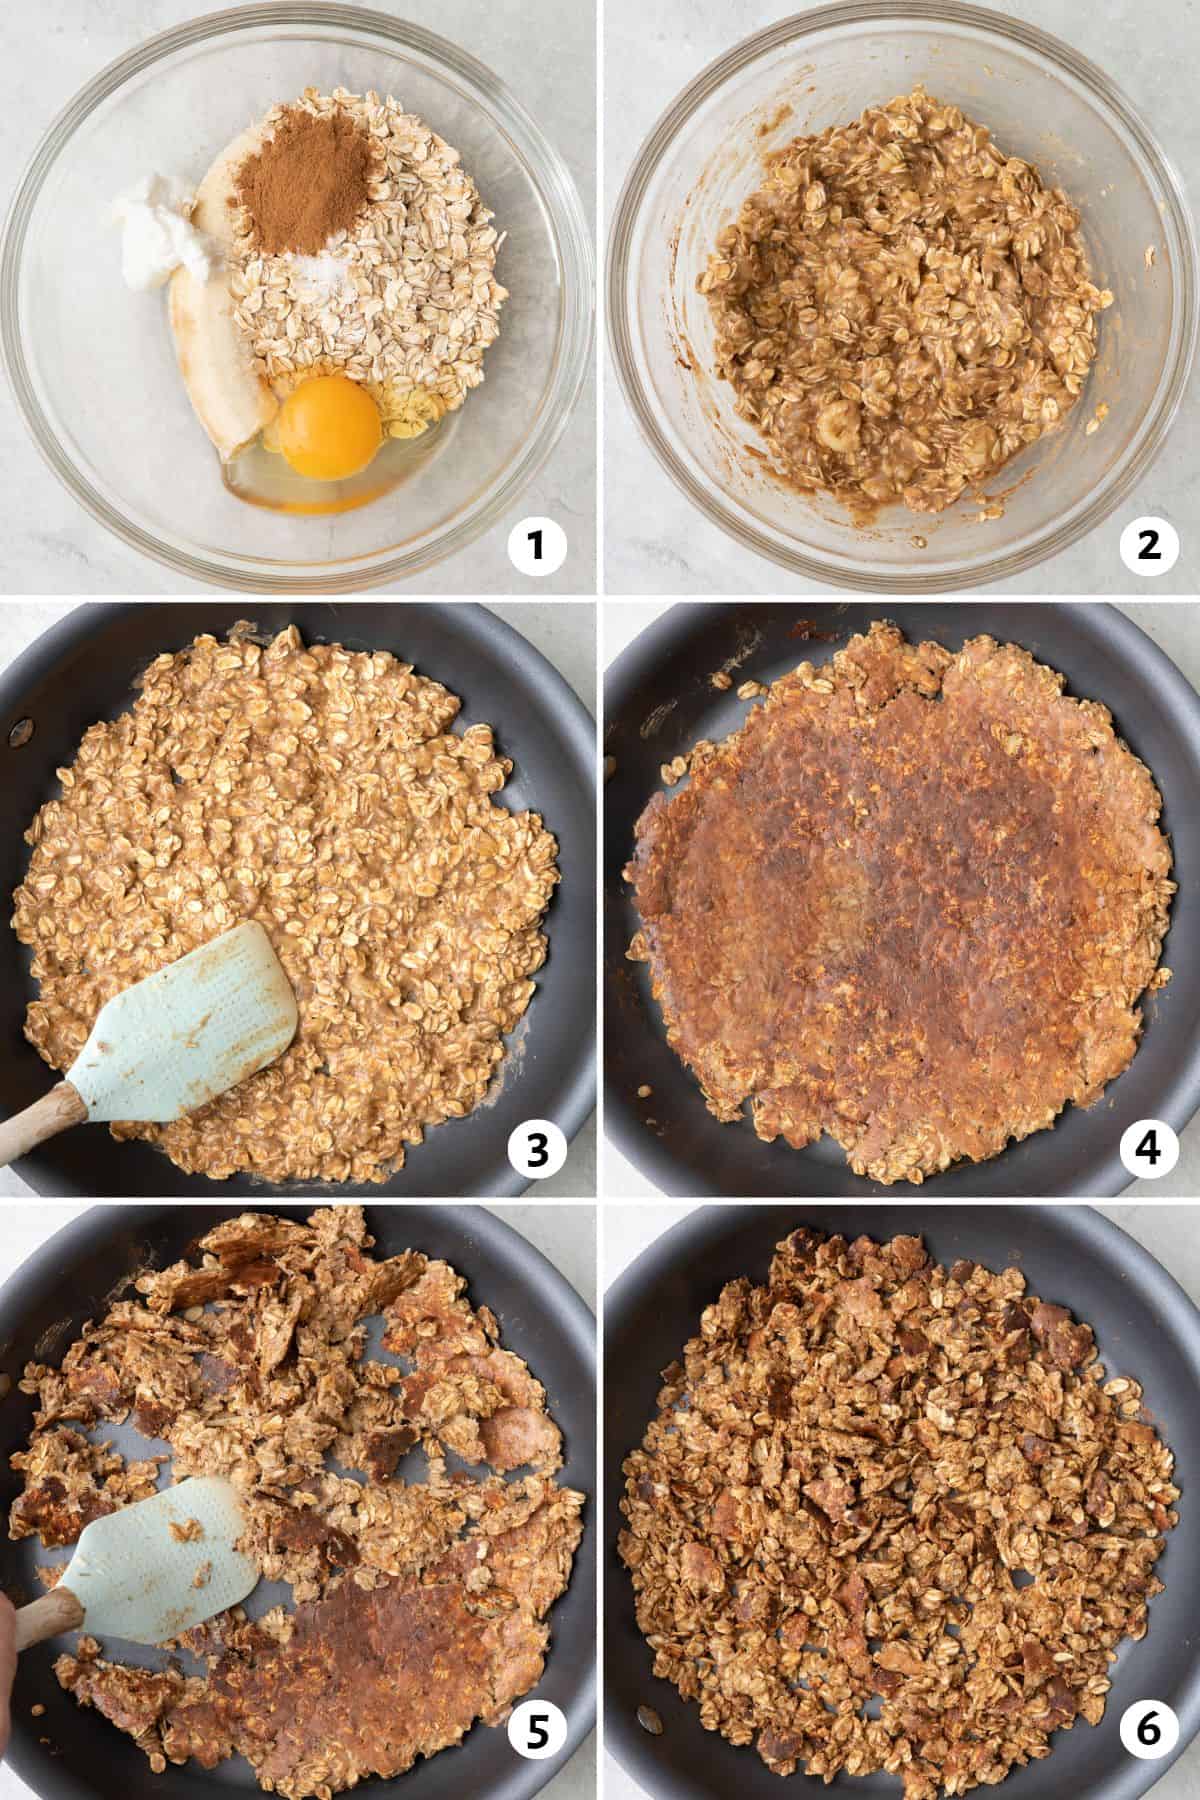 6 image collage making recipe: 1- banana oats, egg, yogurt, cinnamon, and salt in a large bowl before mixing, 2- after mixing, 3-oat mixture spread out in a skillet, 4- after flipping to show browned surface, 5- spatula breaking up the oat mixture, 6- after crumbled and fully cooked.